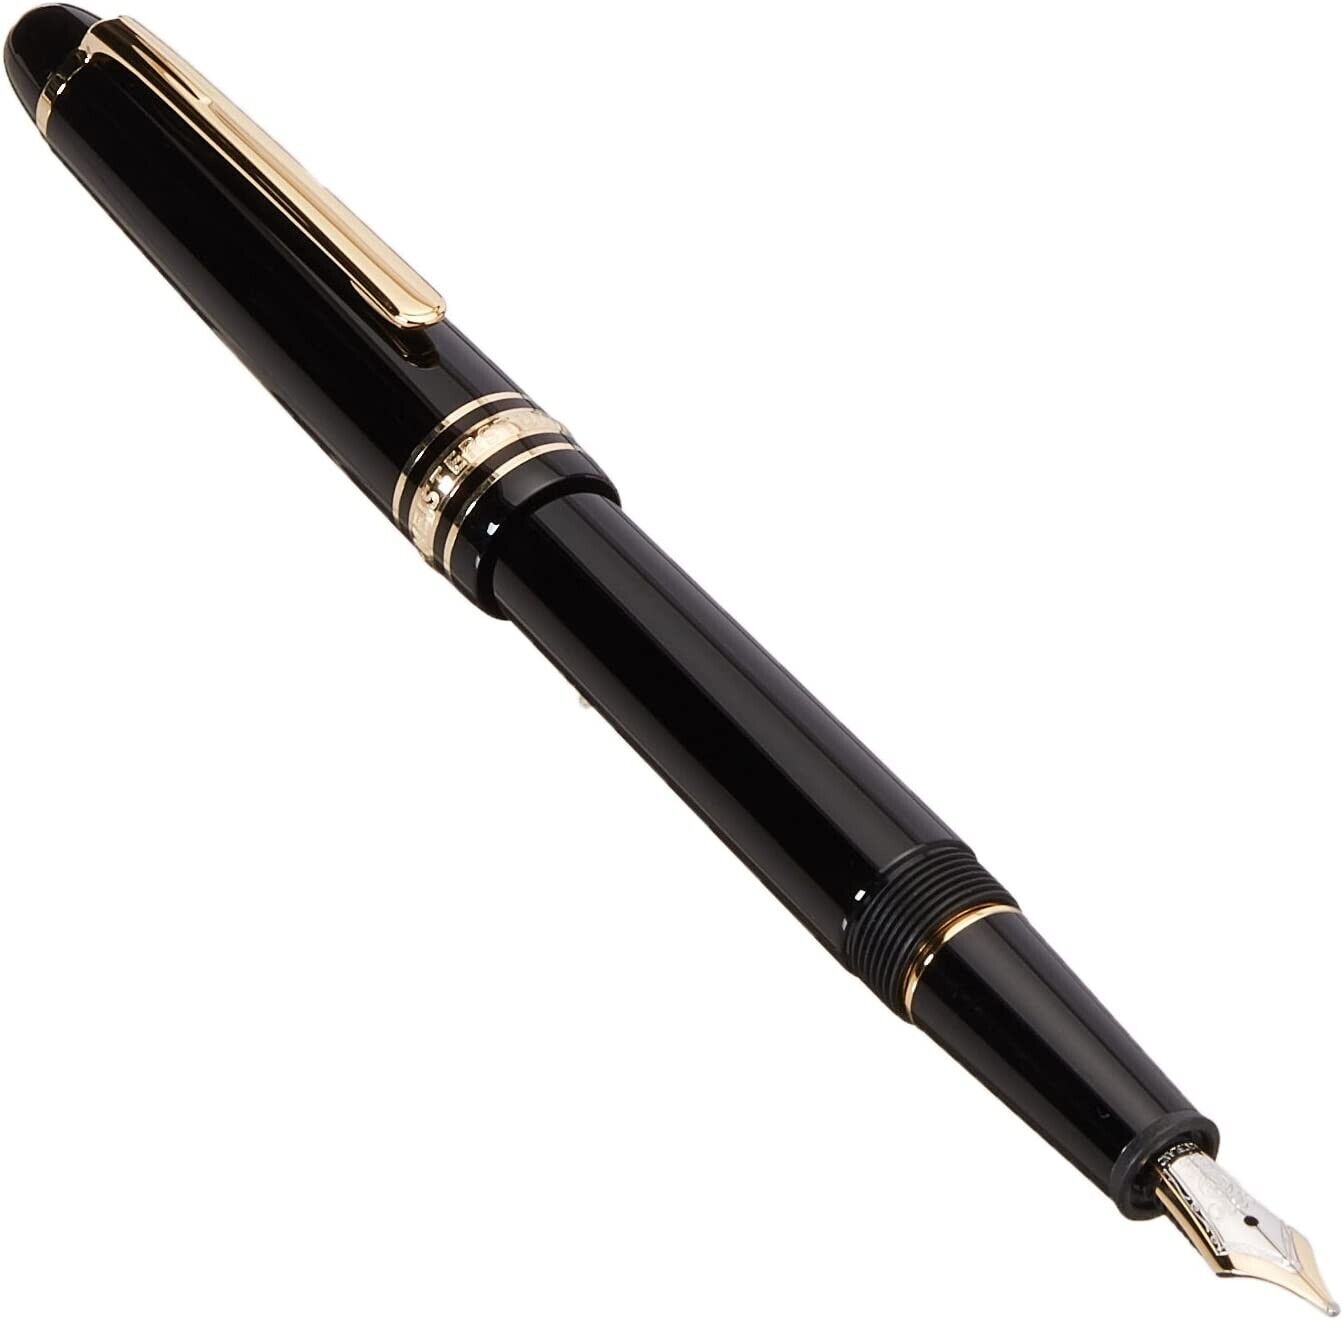 NEW MONTBLANC MEISTERSTUCK 145 FOUNTAIN PEN IN BLACK GOLD  M Nib Curated Gift